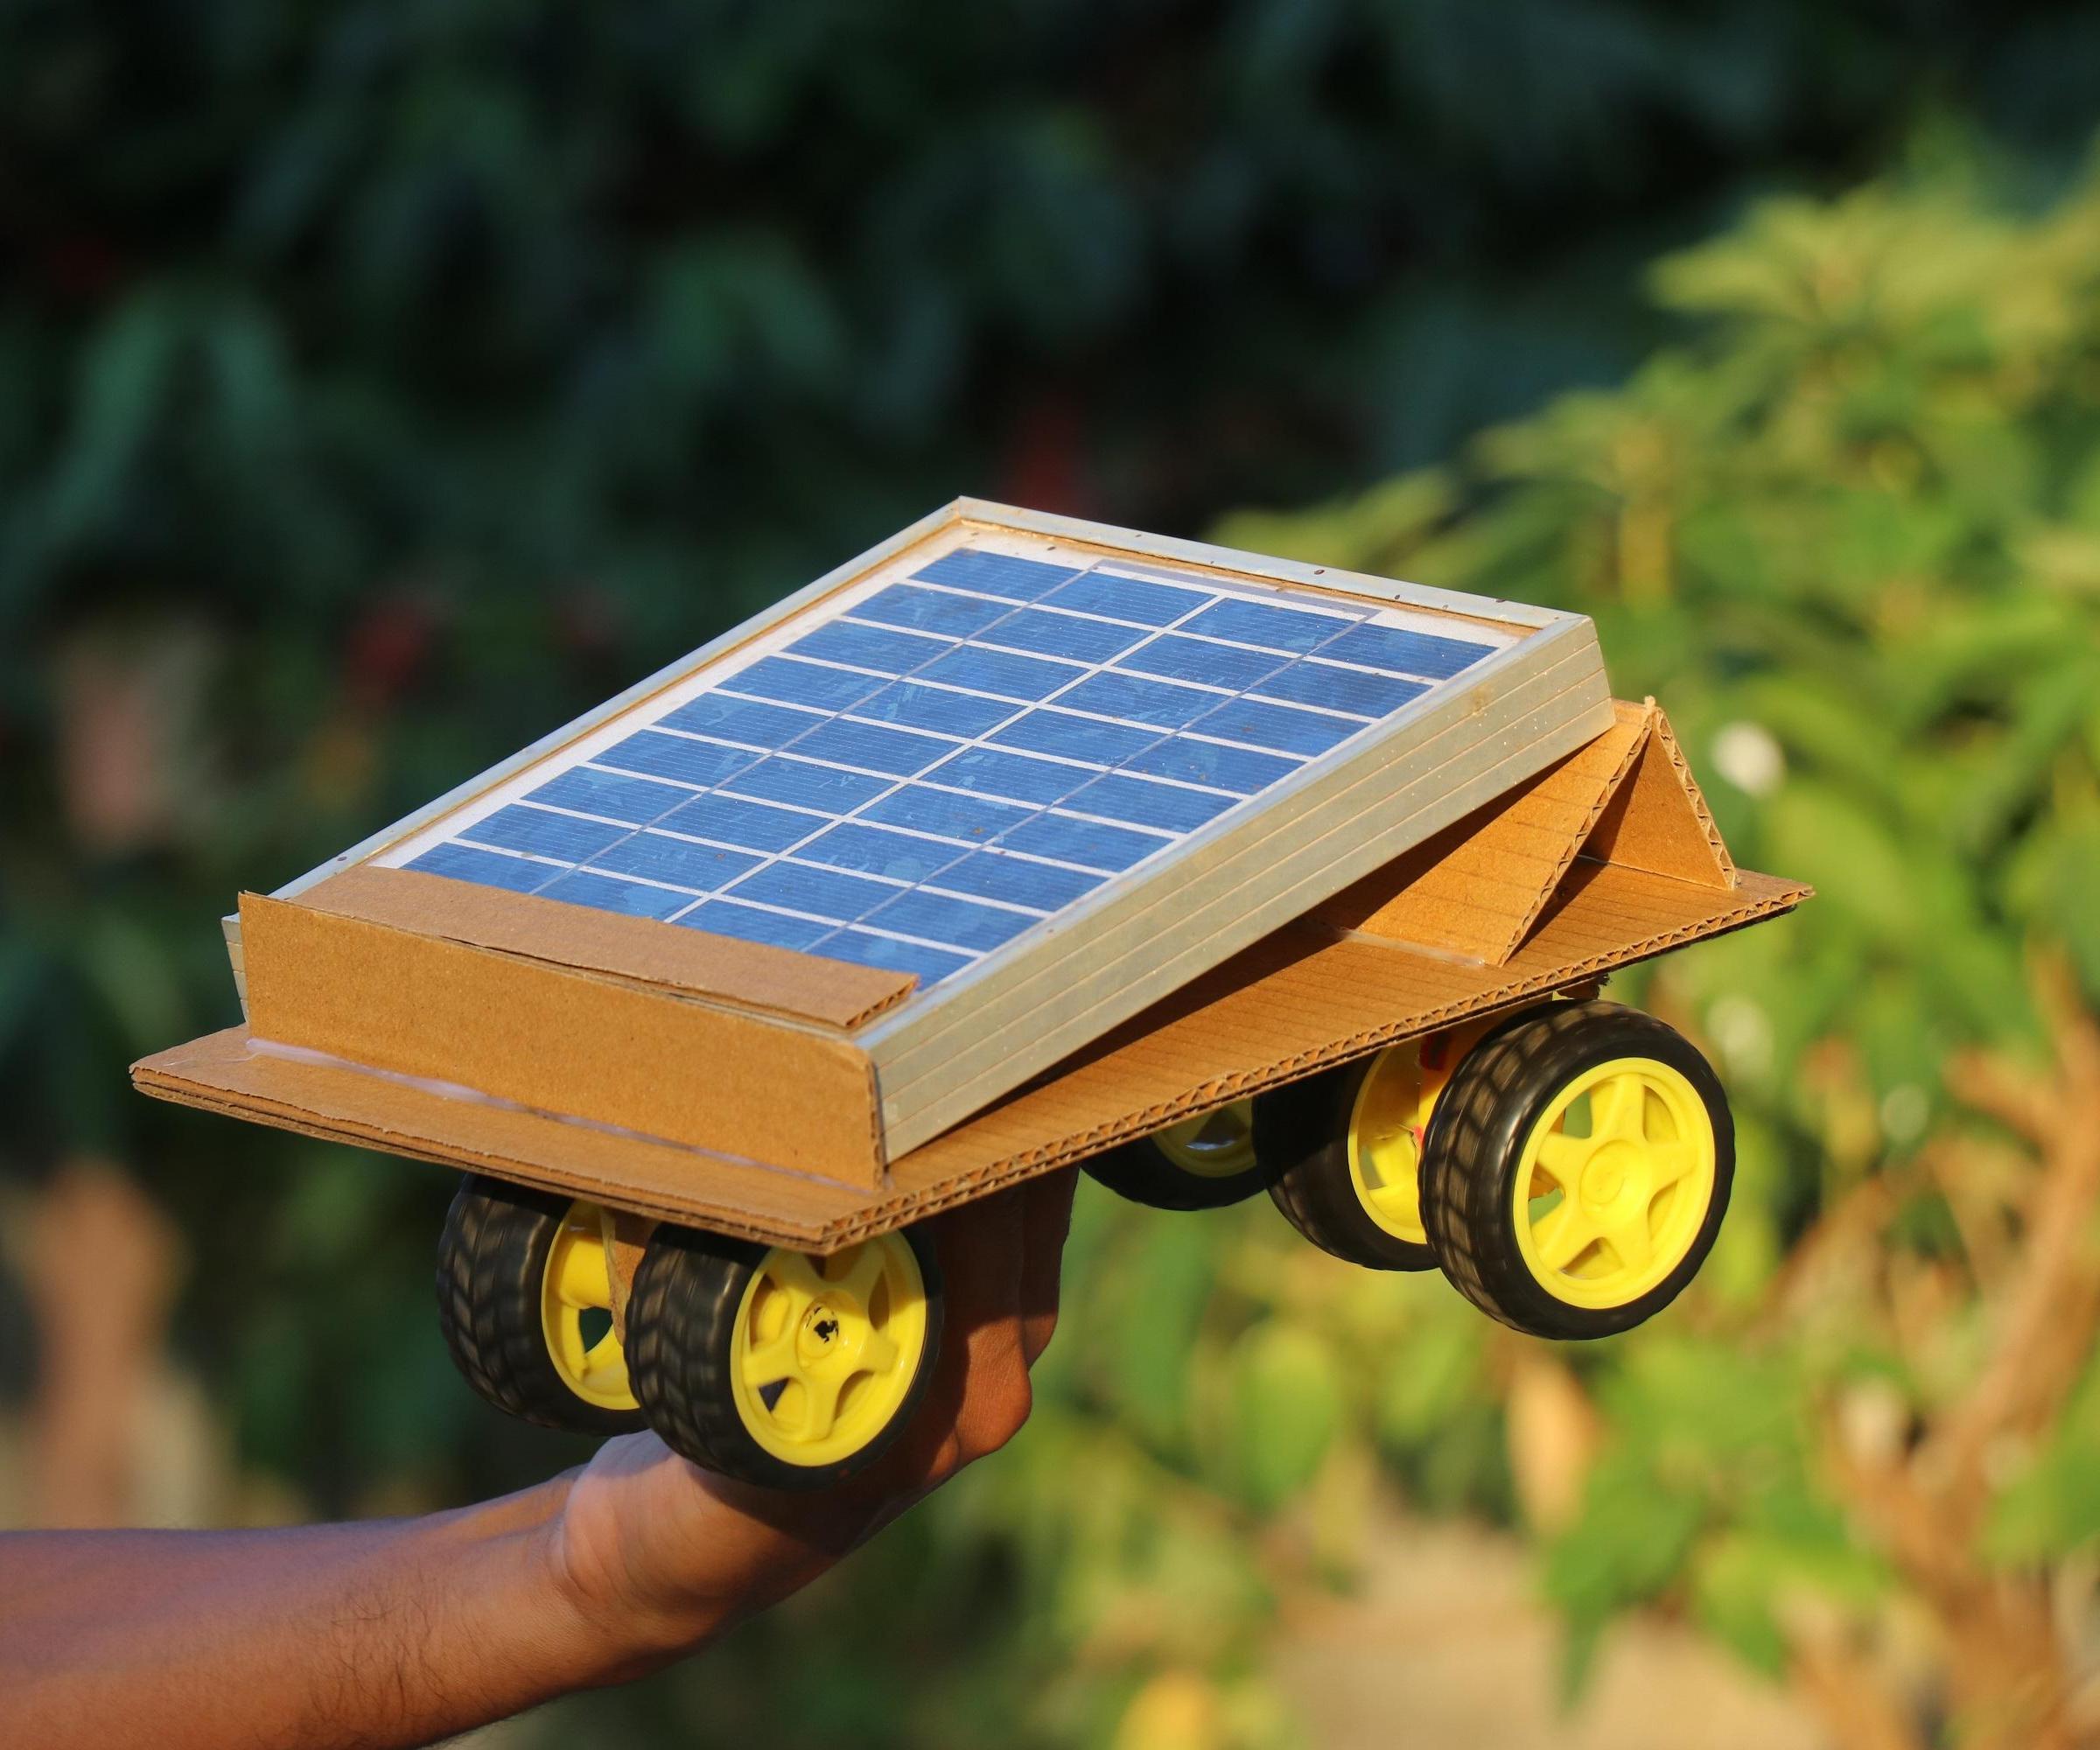 How to Make Solar Powered Car With Powerful Torque in a Very Easy Way